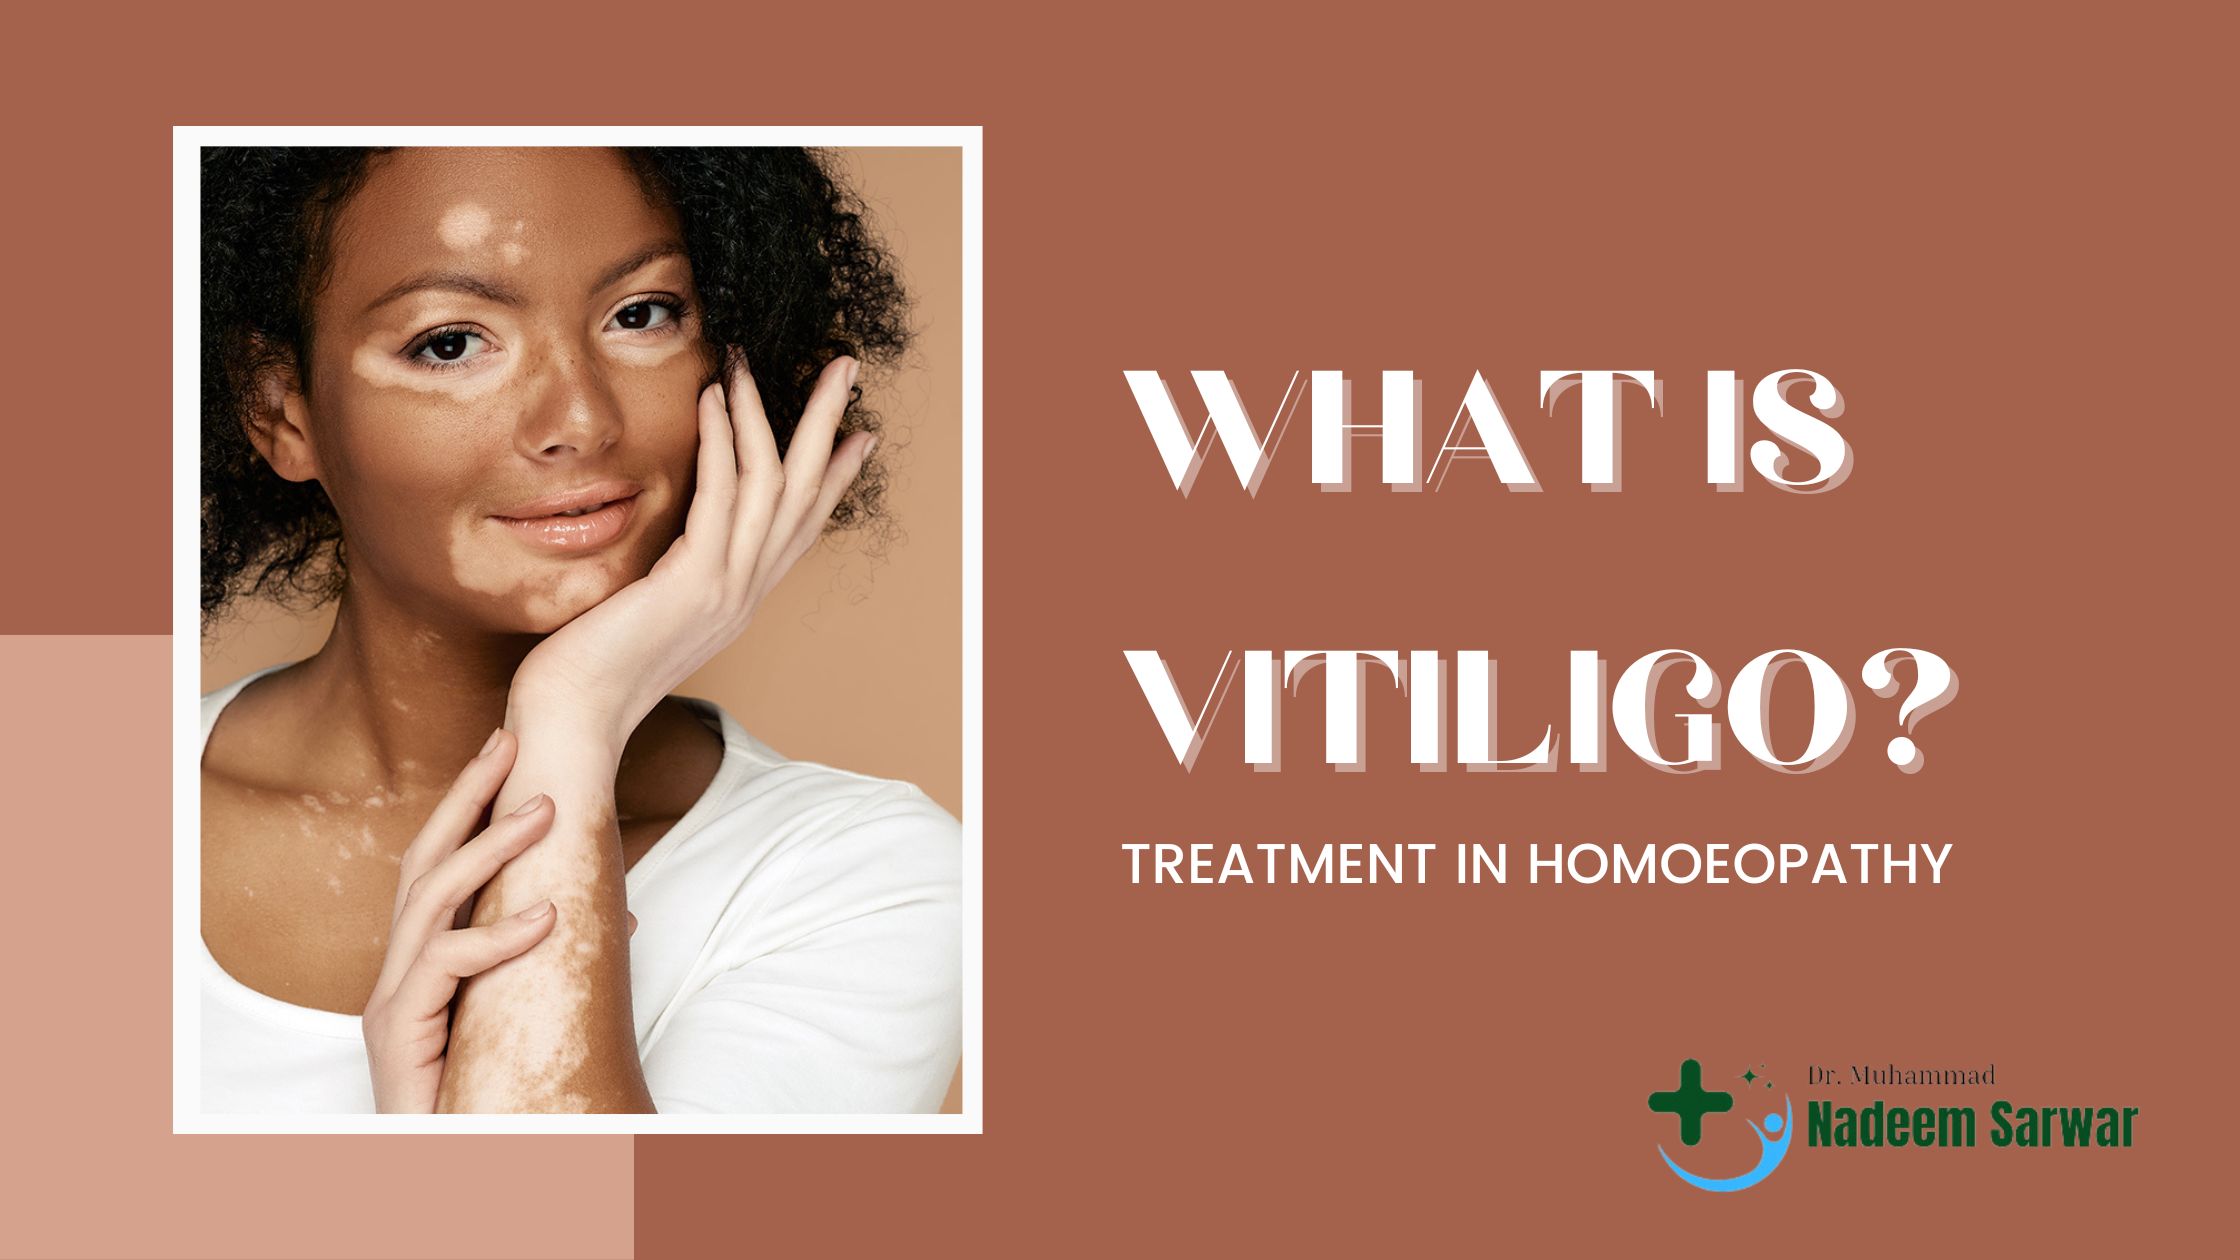 What Is Vitiligo? Treatment in Homoeopathy